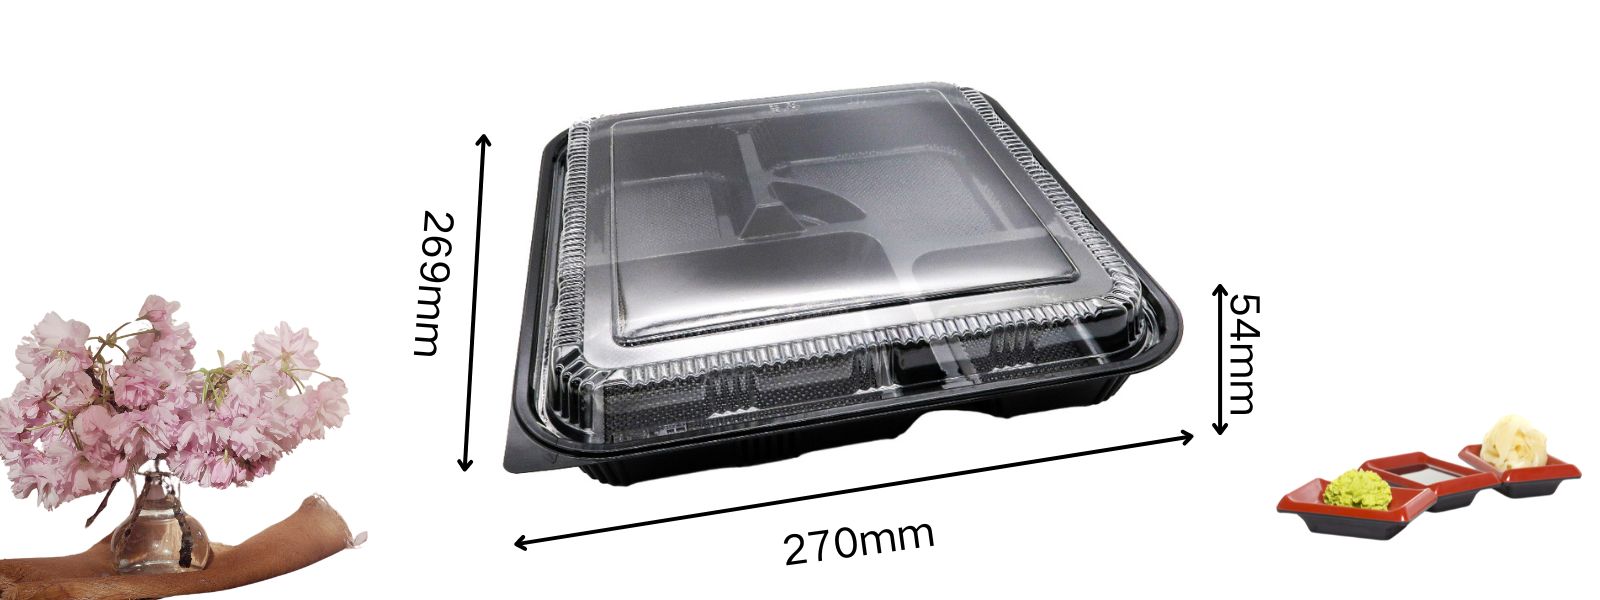 Detailed dimensions of 5-compartment bento box